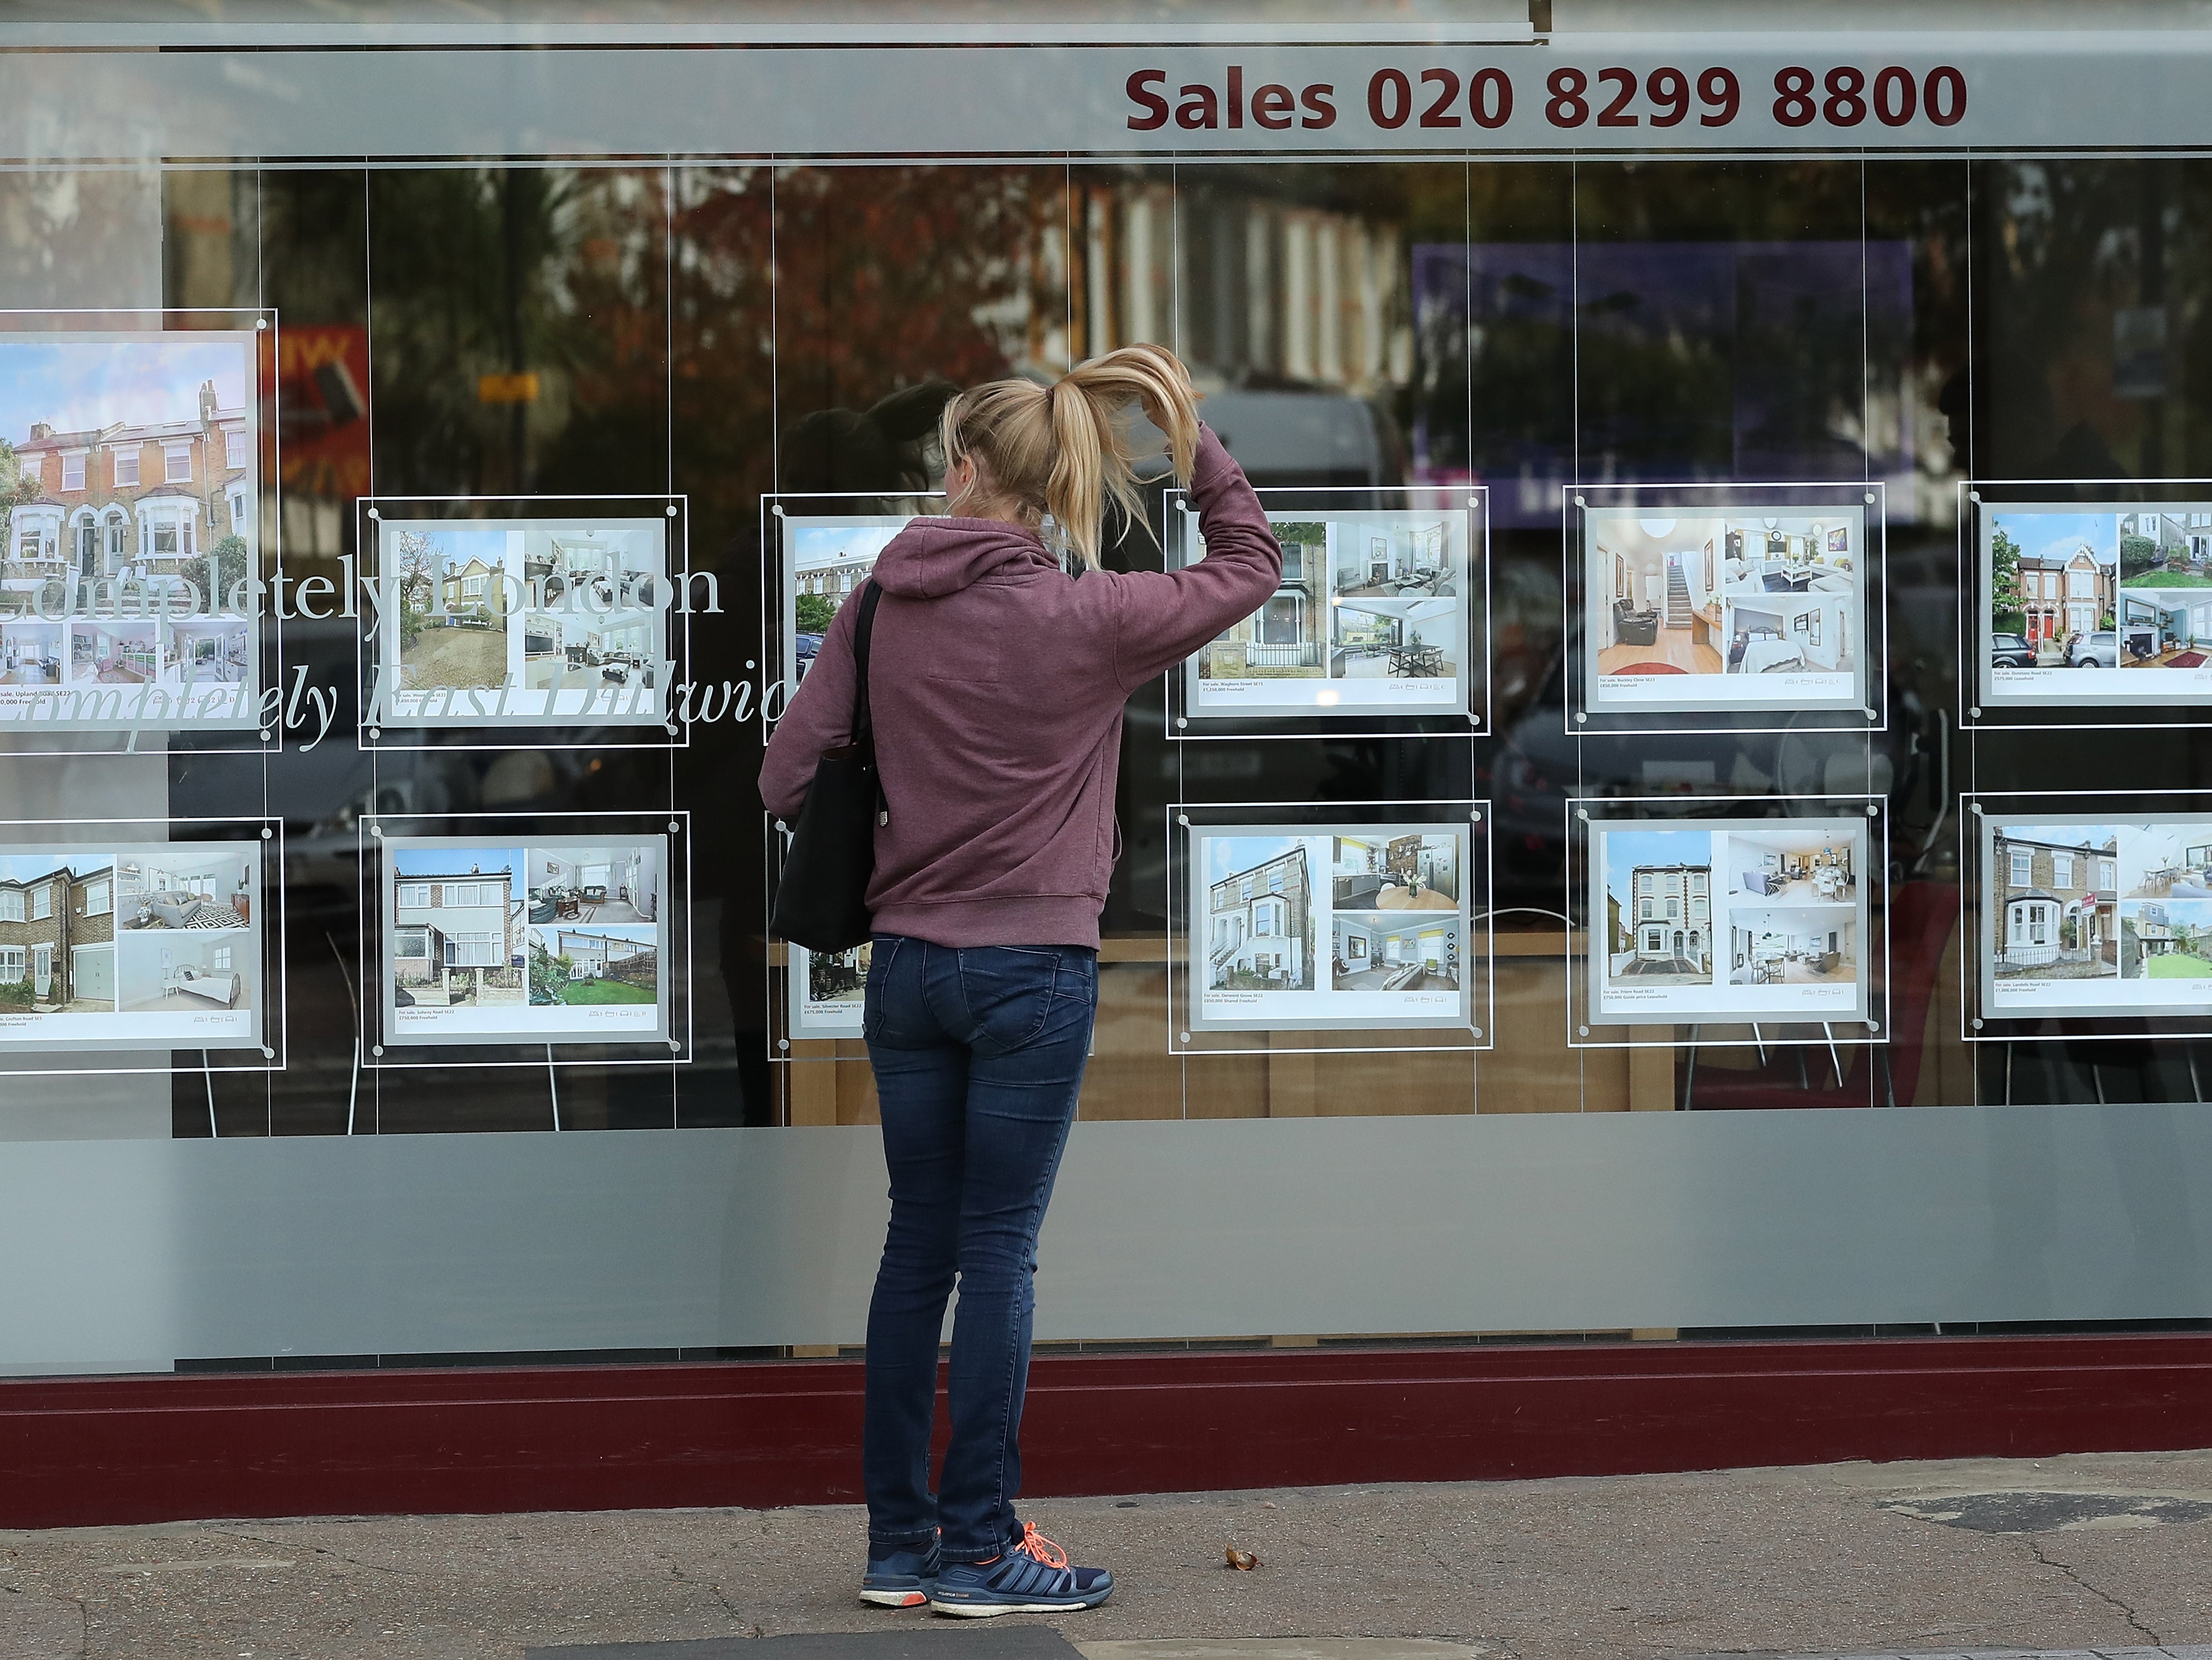 A tax cut on property purchases tapered off from 1 July causing sales to fall